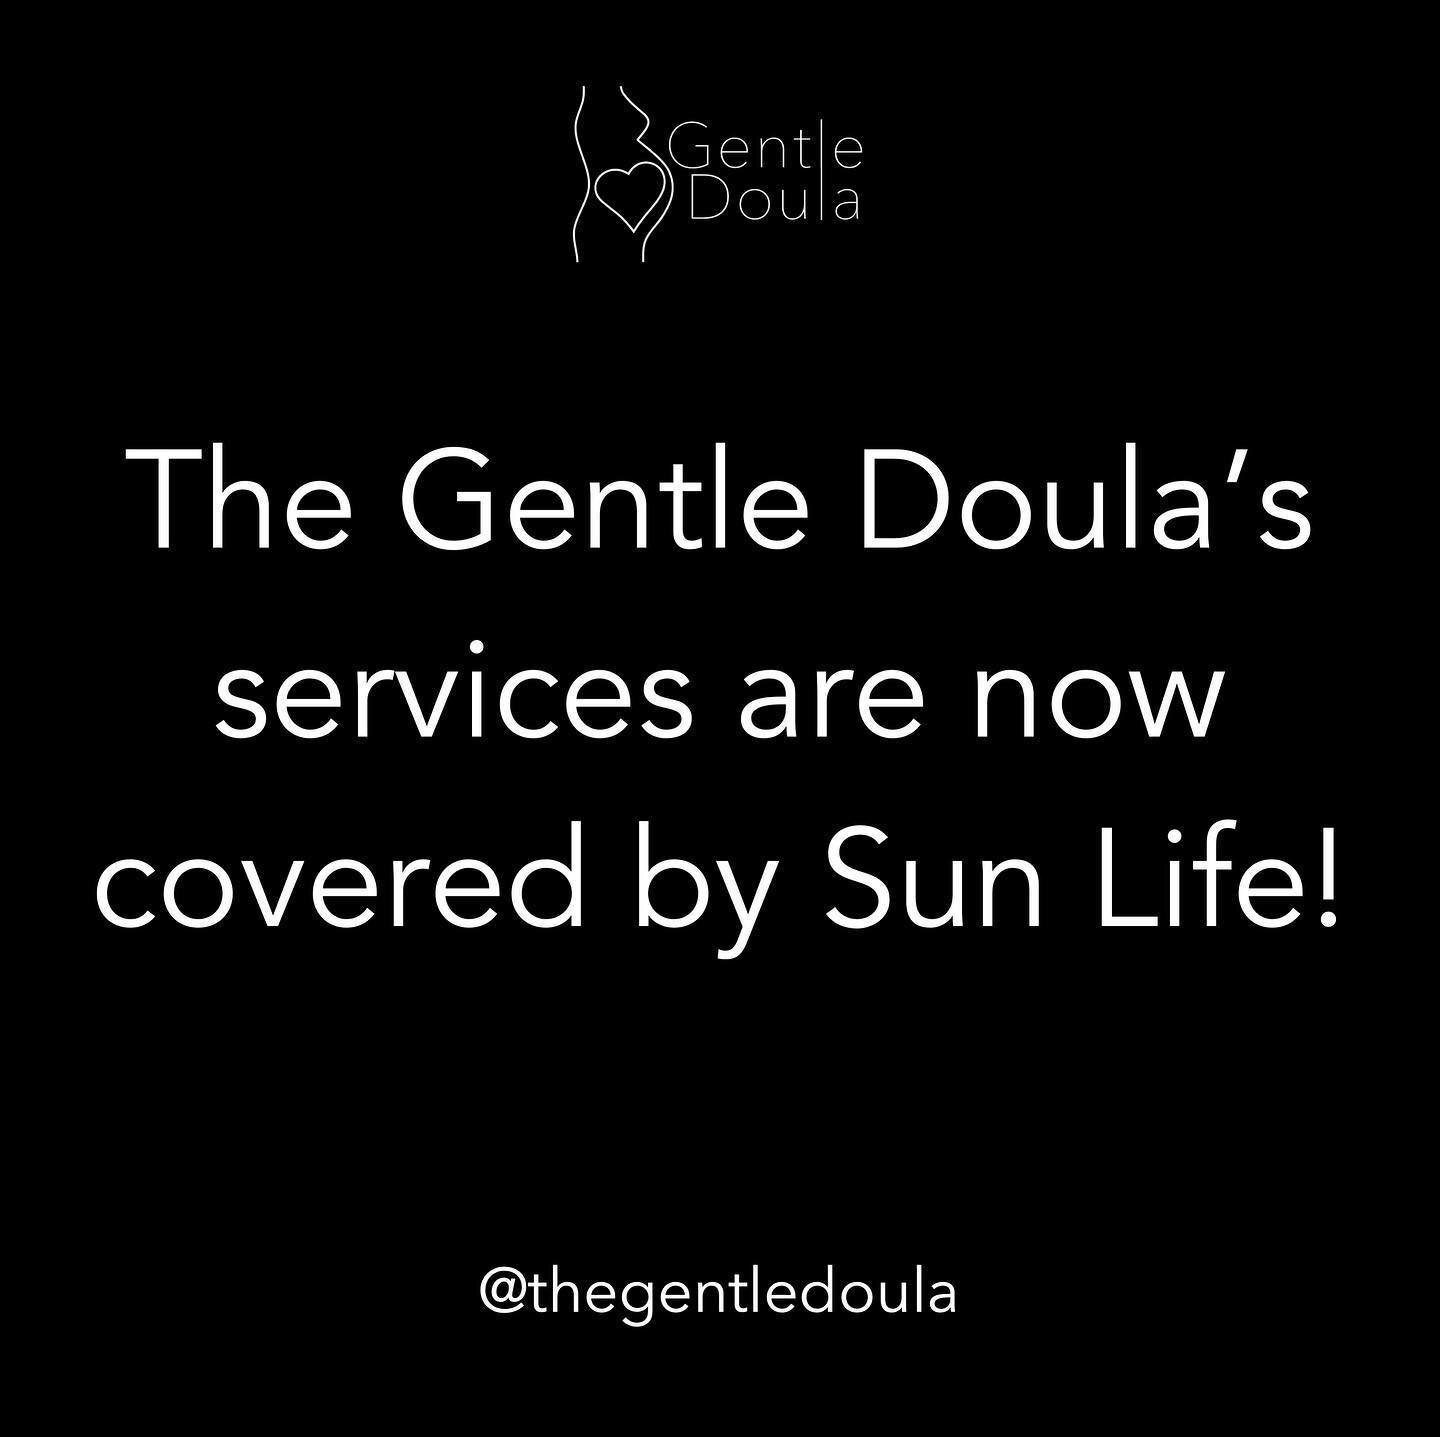 Exciting news!! Doula support just became even more affordable!
.
Effective immediately, your Sun Life Health Spending Account (HSA) can be used to cover support by a doula certified through Doula Canada&hellip; (that&rsquo;s me!)
.
Don&rsquo;t have 